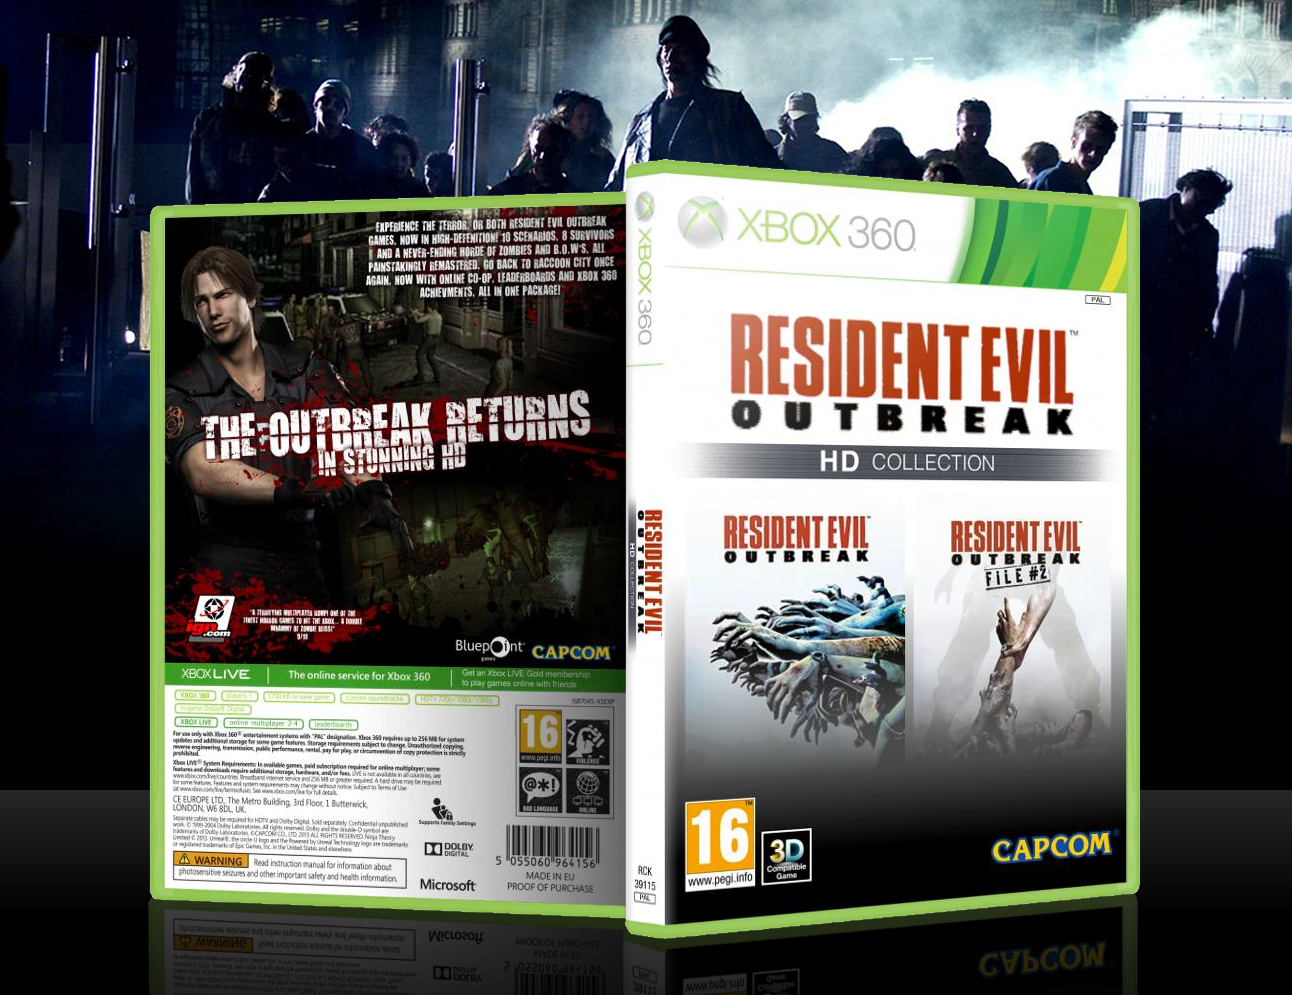 Resident Evil Outbreak: HD Collection box cover